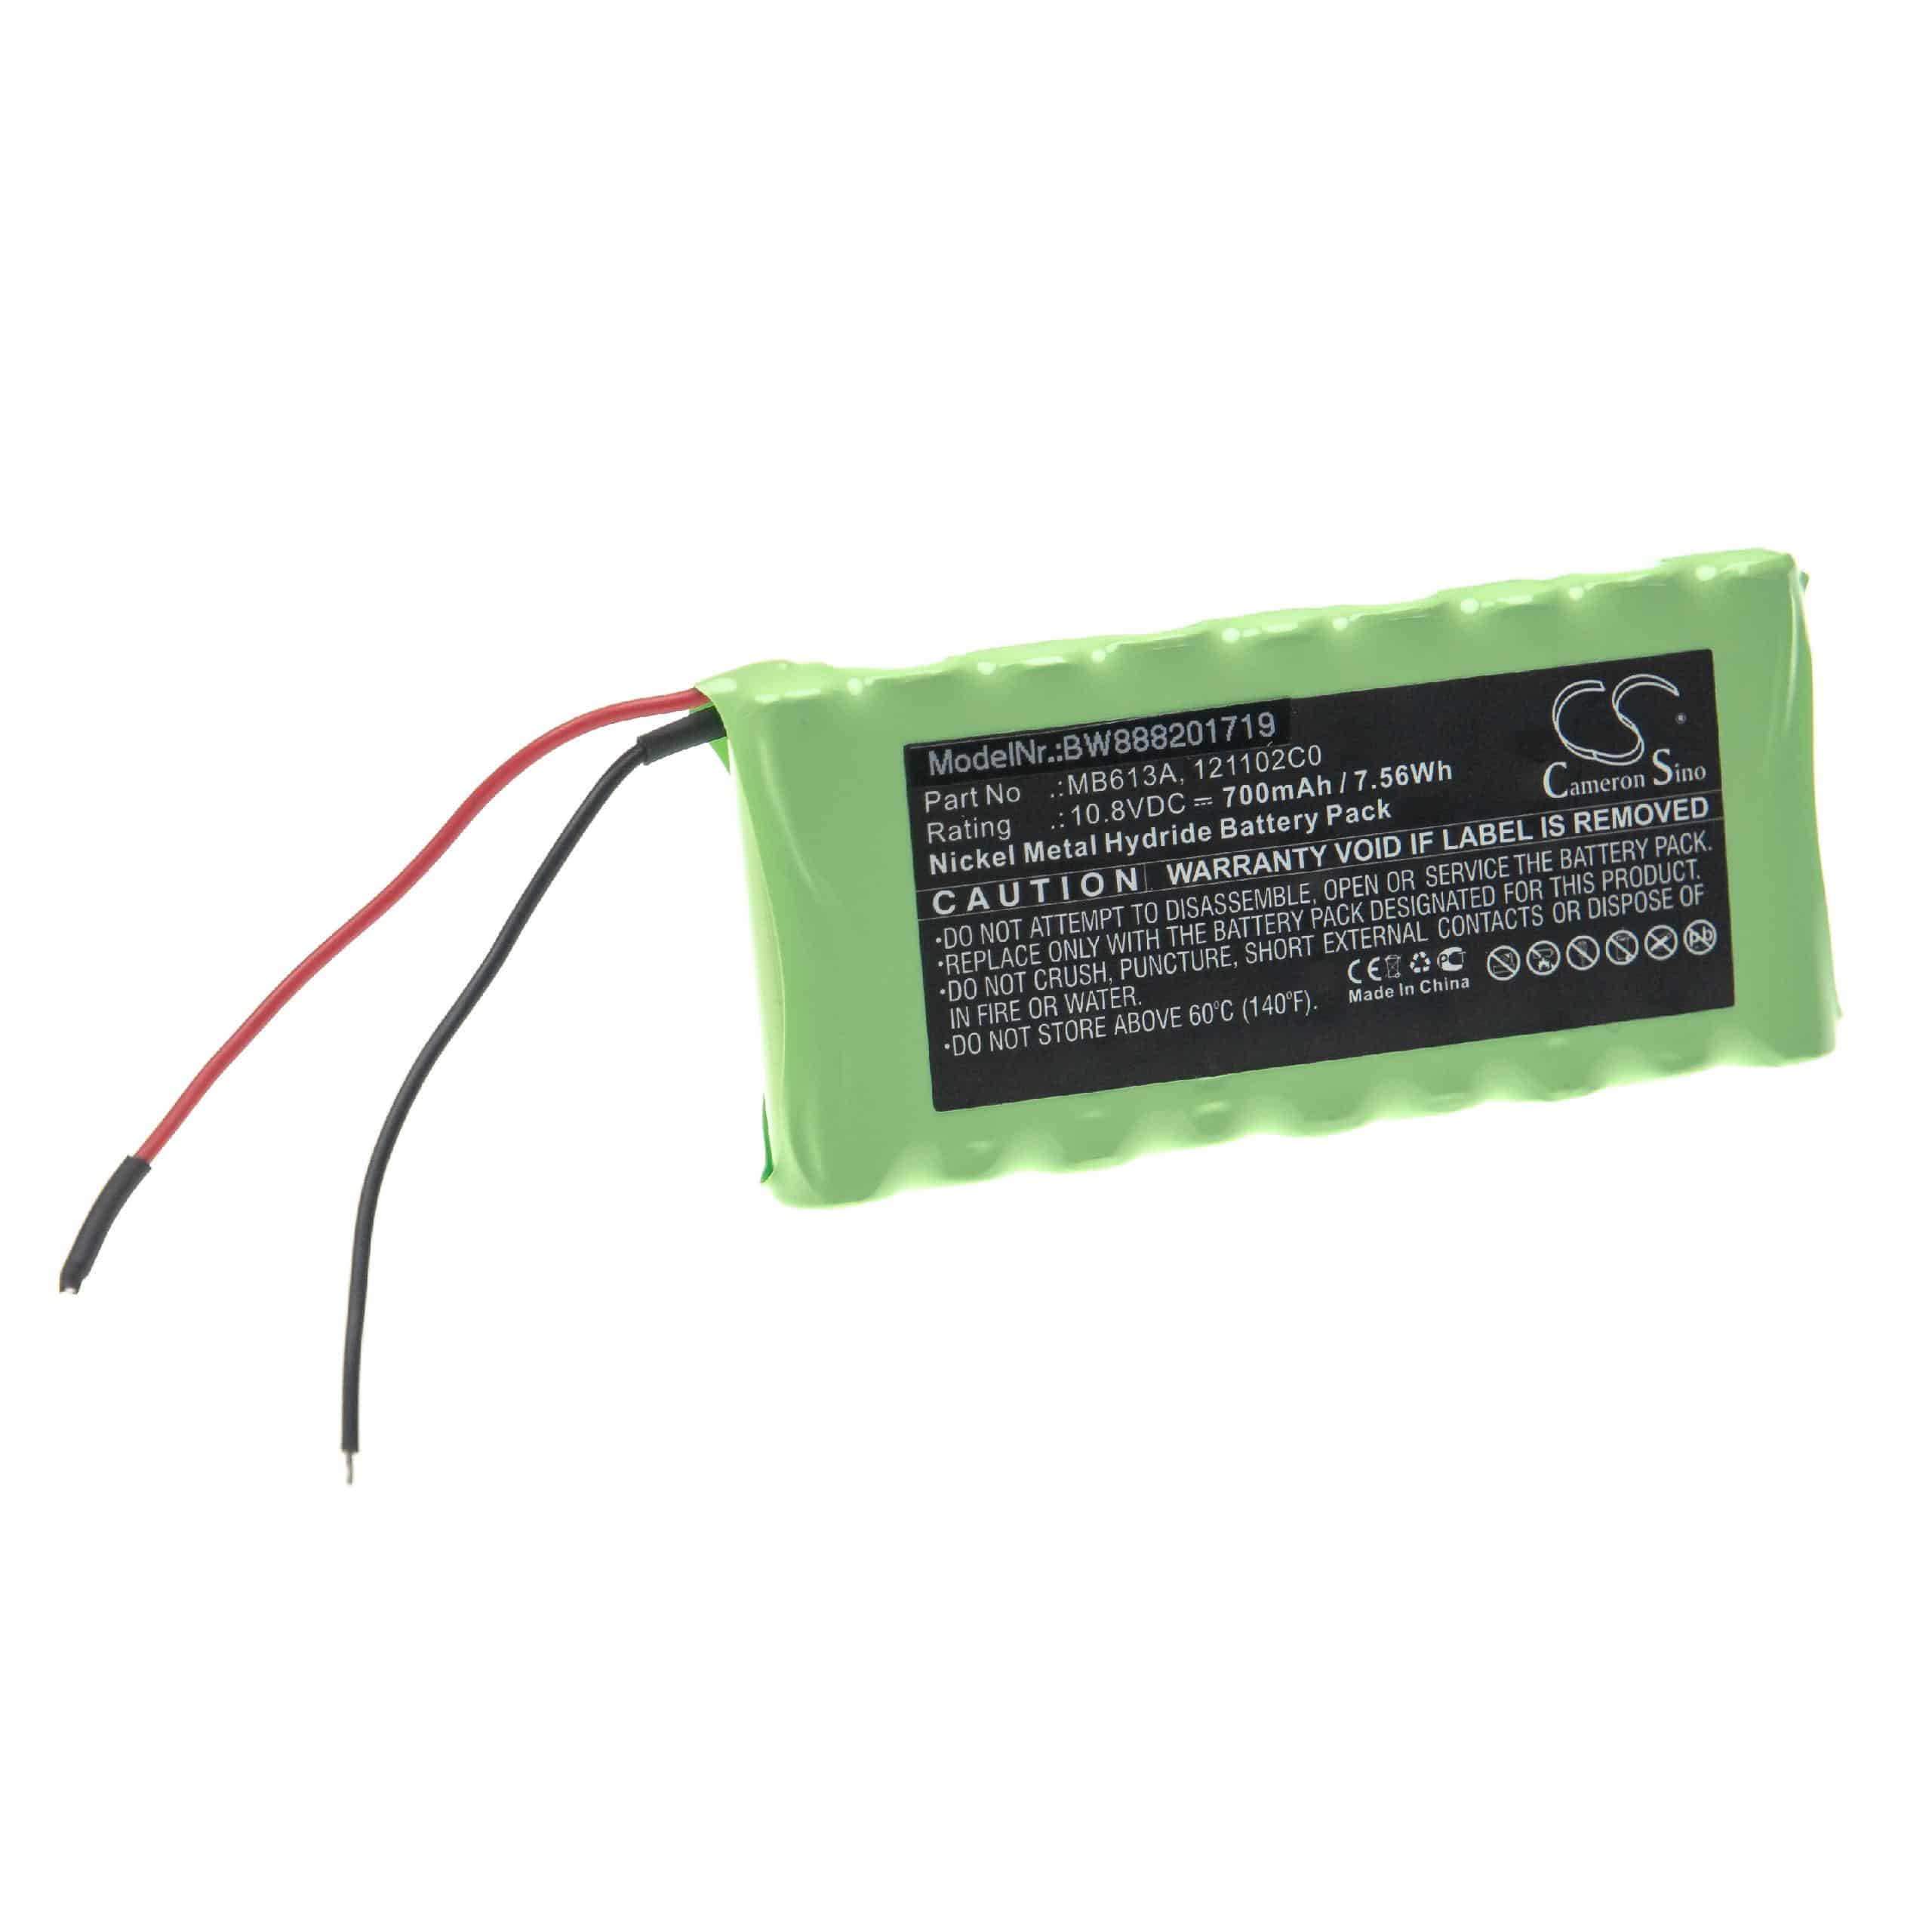 Medical Equipment Battery Replacement for Maquet MB613A, 121102C0 - 700mAh 10.8V NiMH